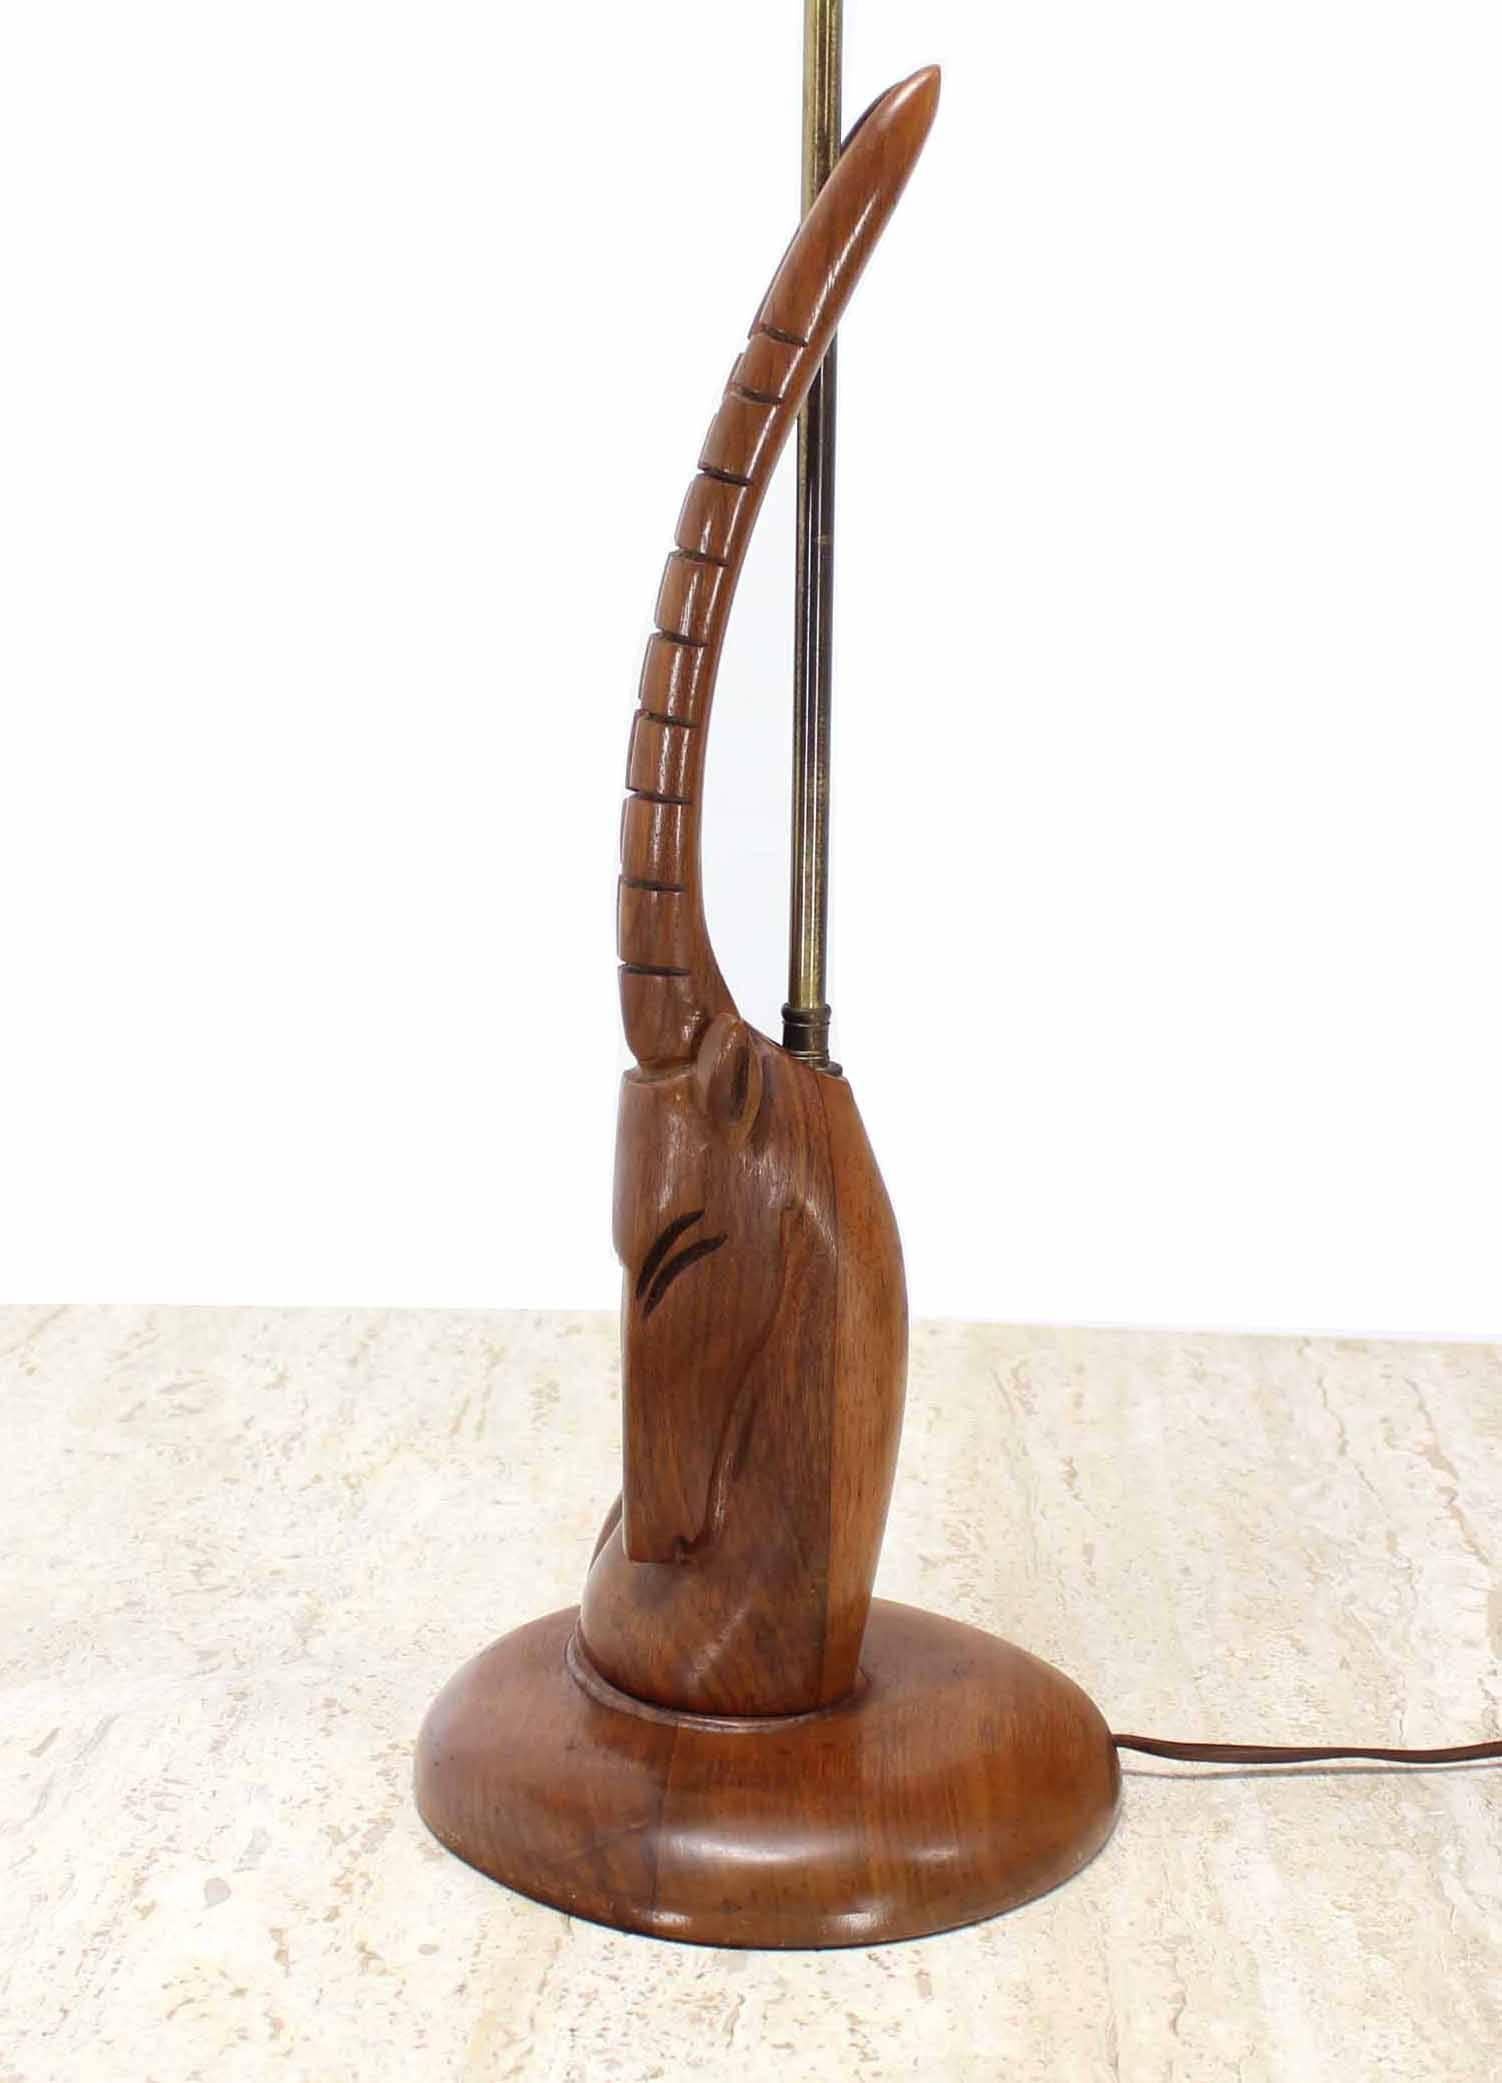 Pair of Sculptural Carved Wood Gazelle Motive Walnut Table Lamps In Excellent Condition For Sale In Rockaway, NJ